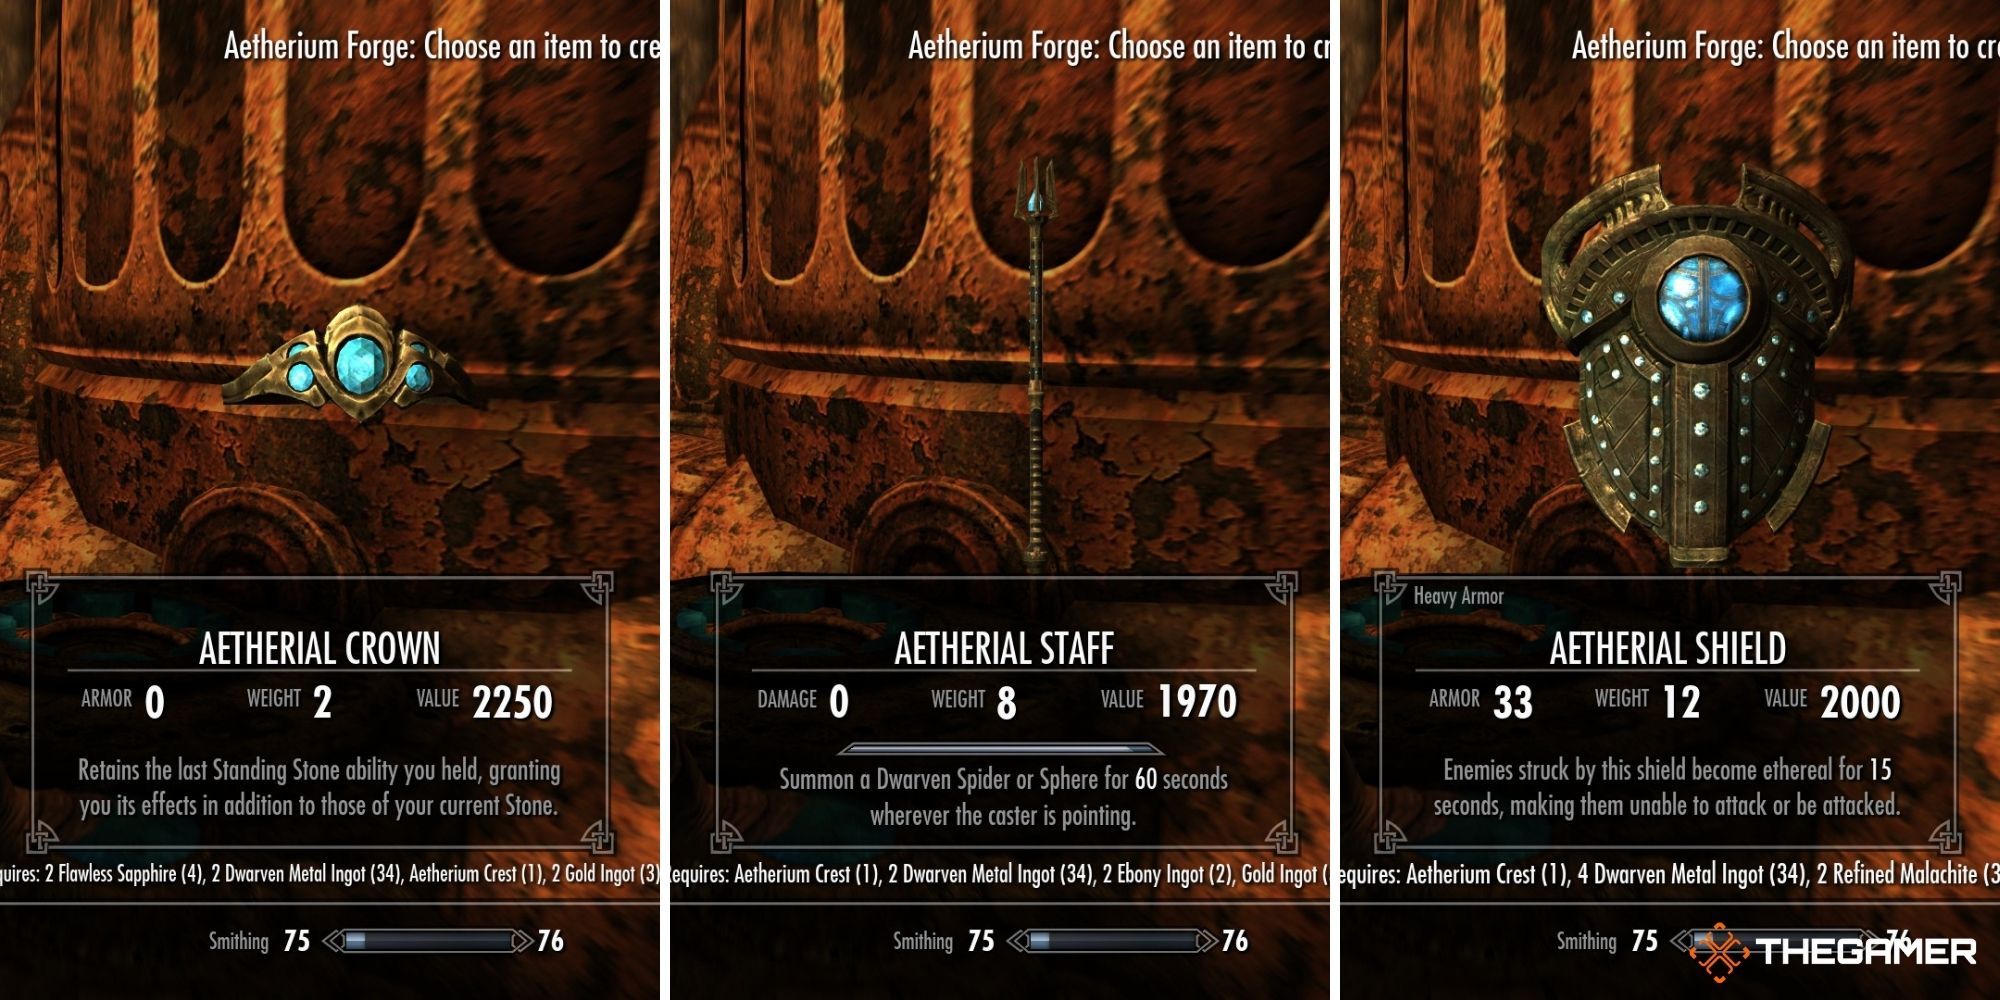 Skryim - Lost to the Ages Quest Walkthrough, Possible Aetherial Items (left - aetherial crown) (centre - aetherial staff) (right - aetherial shield)